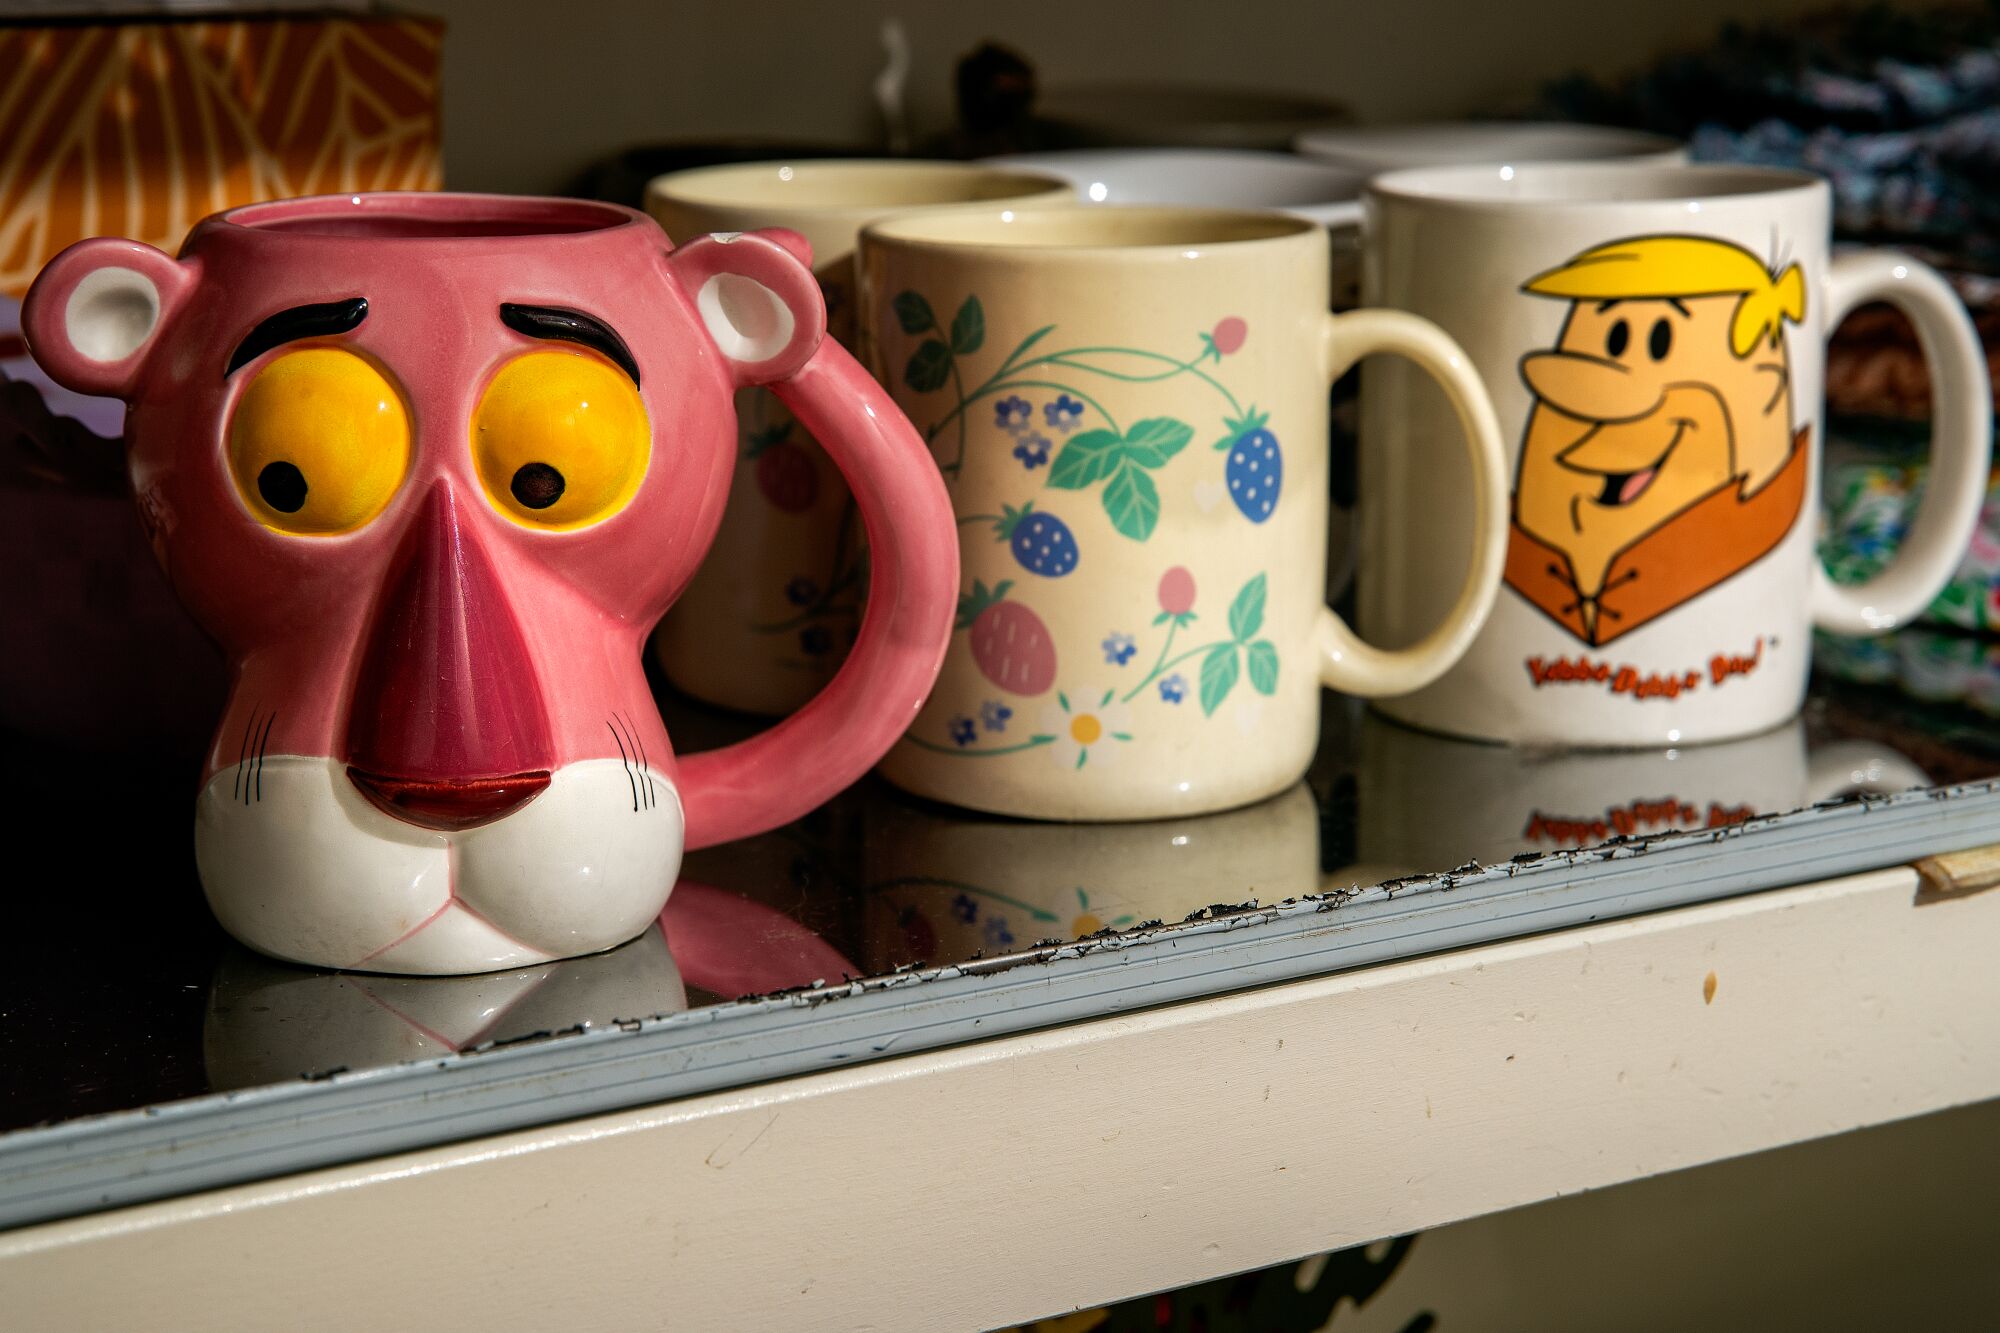 Coffee mugs purchased from estate sales are situated on a shelf inside the kitchen of Amy Solomon's home in Glendale.